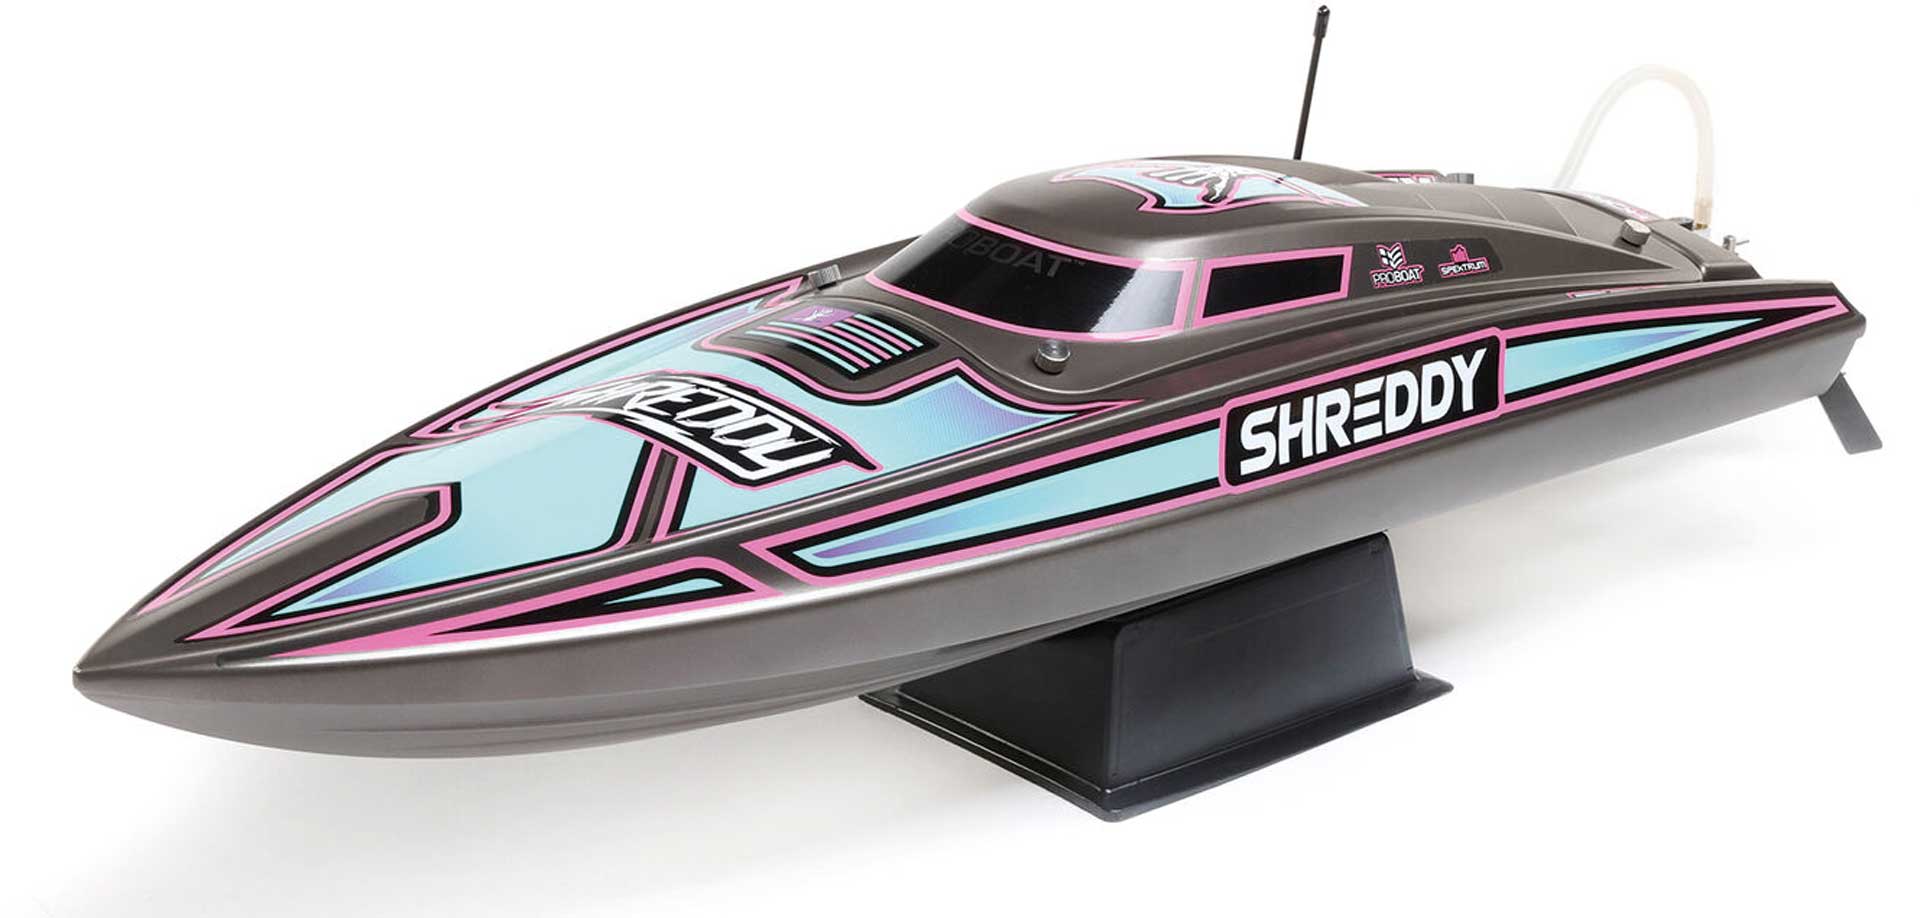 PROBOAT Recoil 2 "Shreddy" Self-Righting Brushless Rennboot RTR